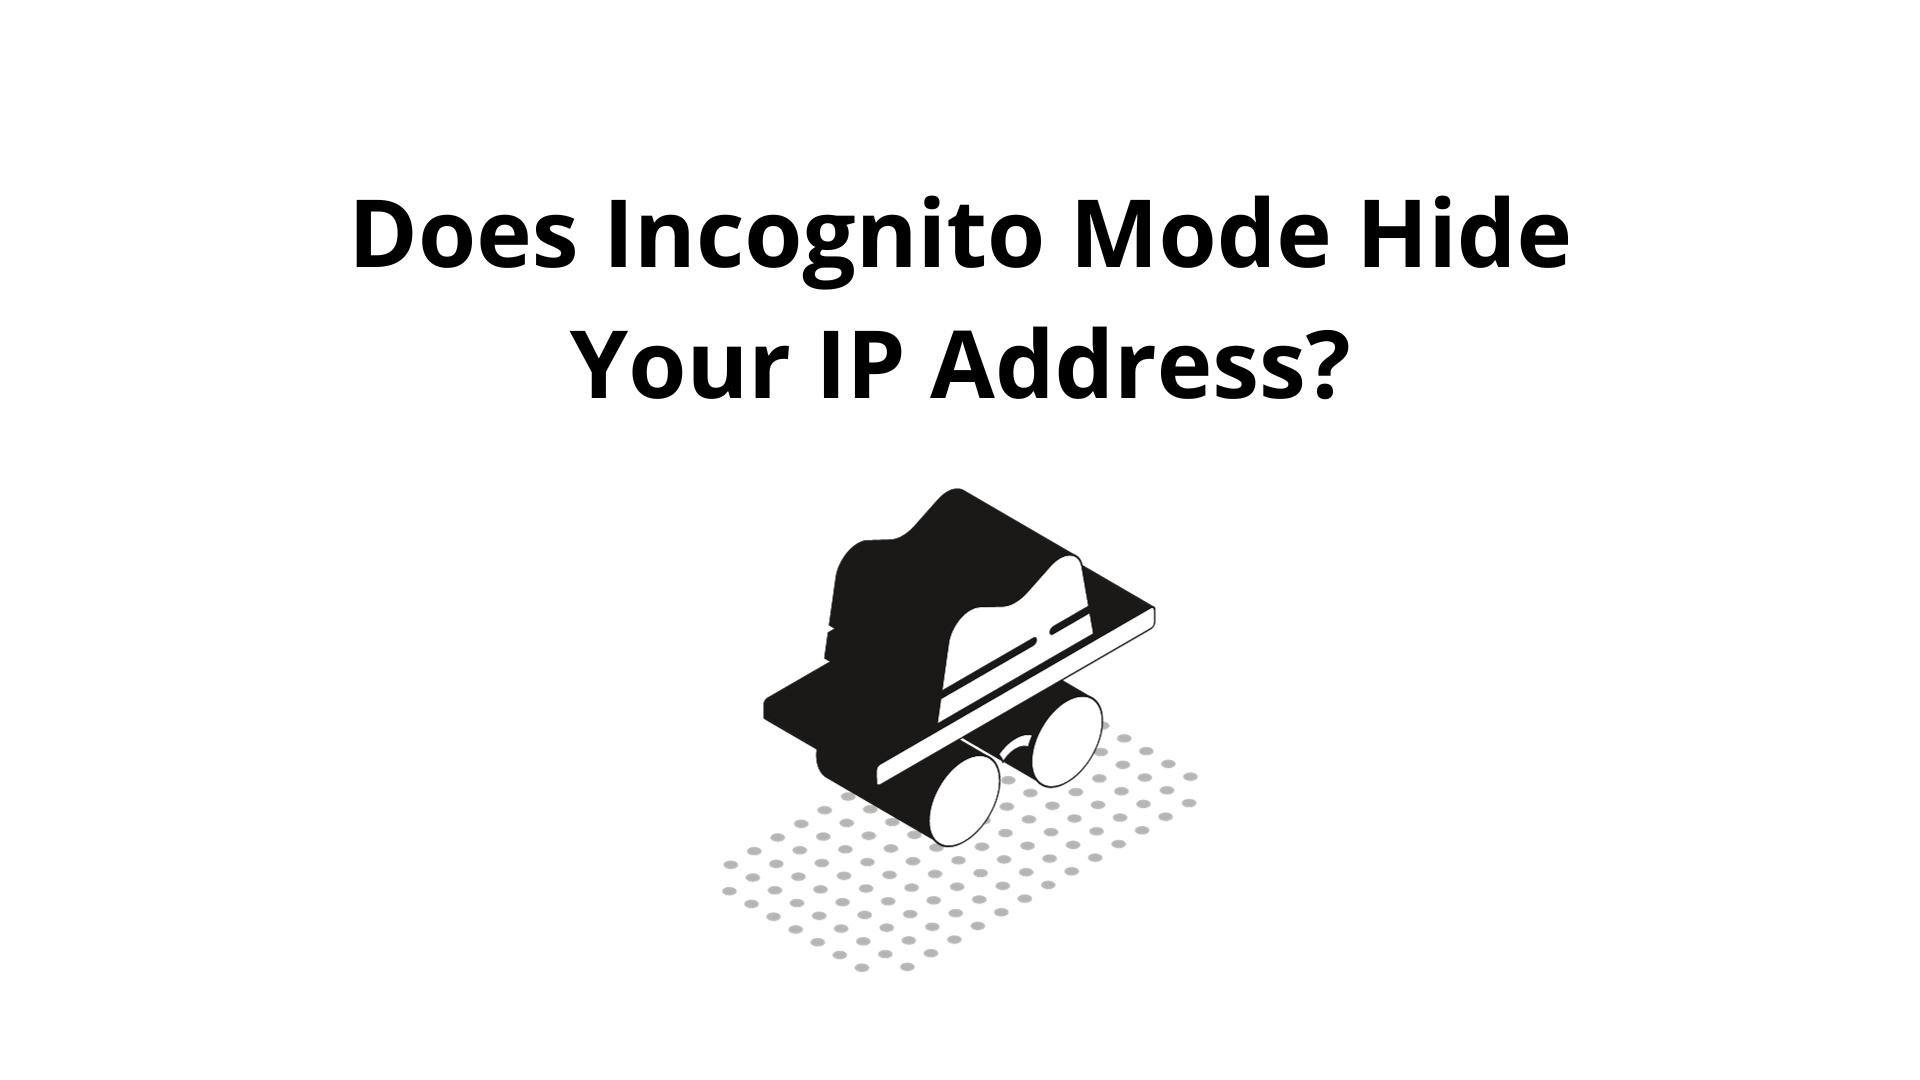 Does Incognito Mode Hide Your IP Address